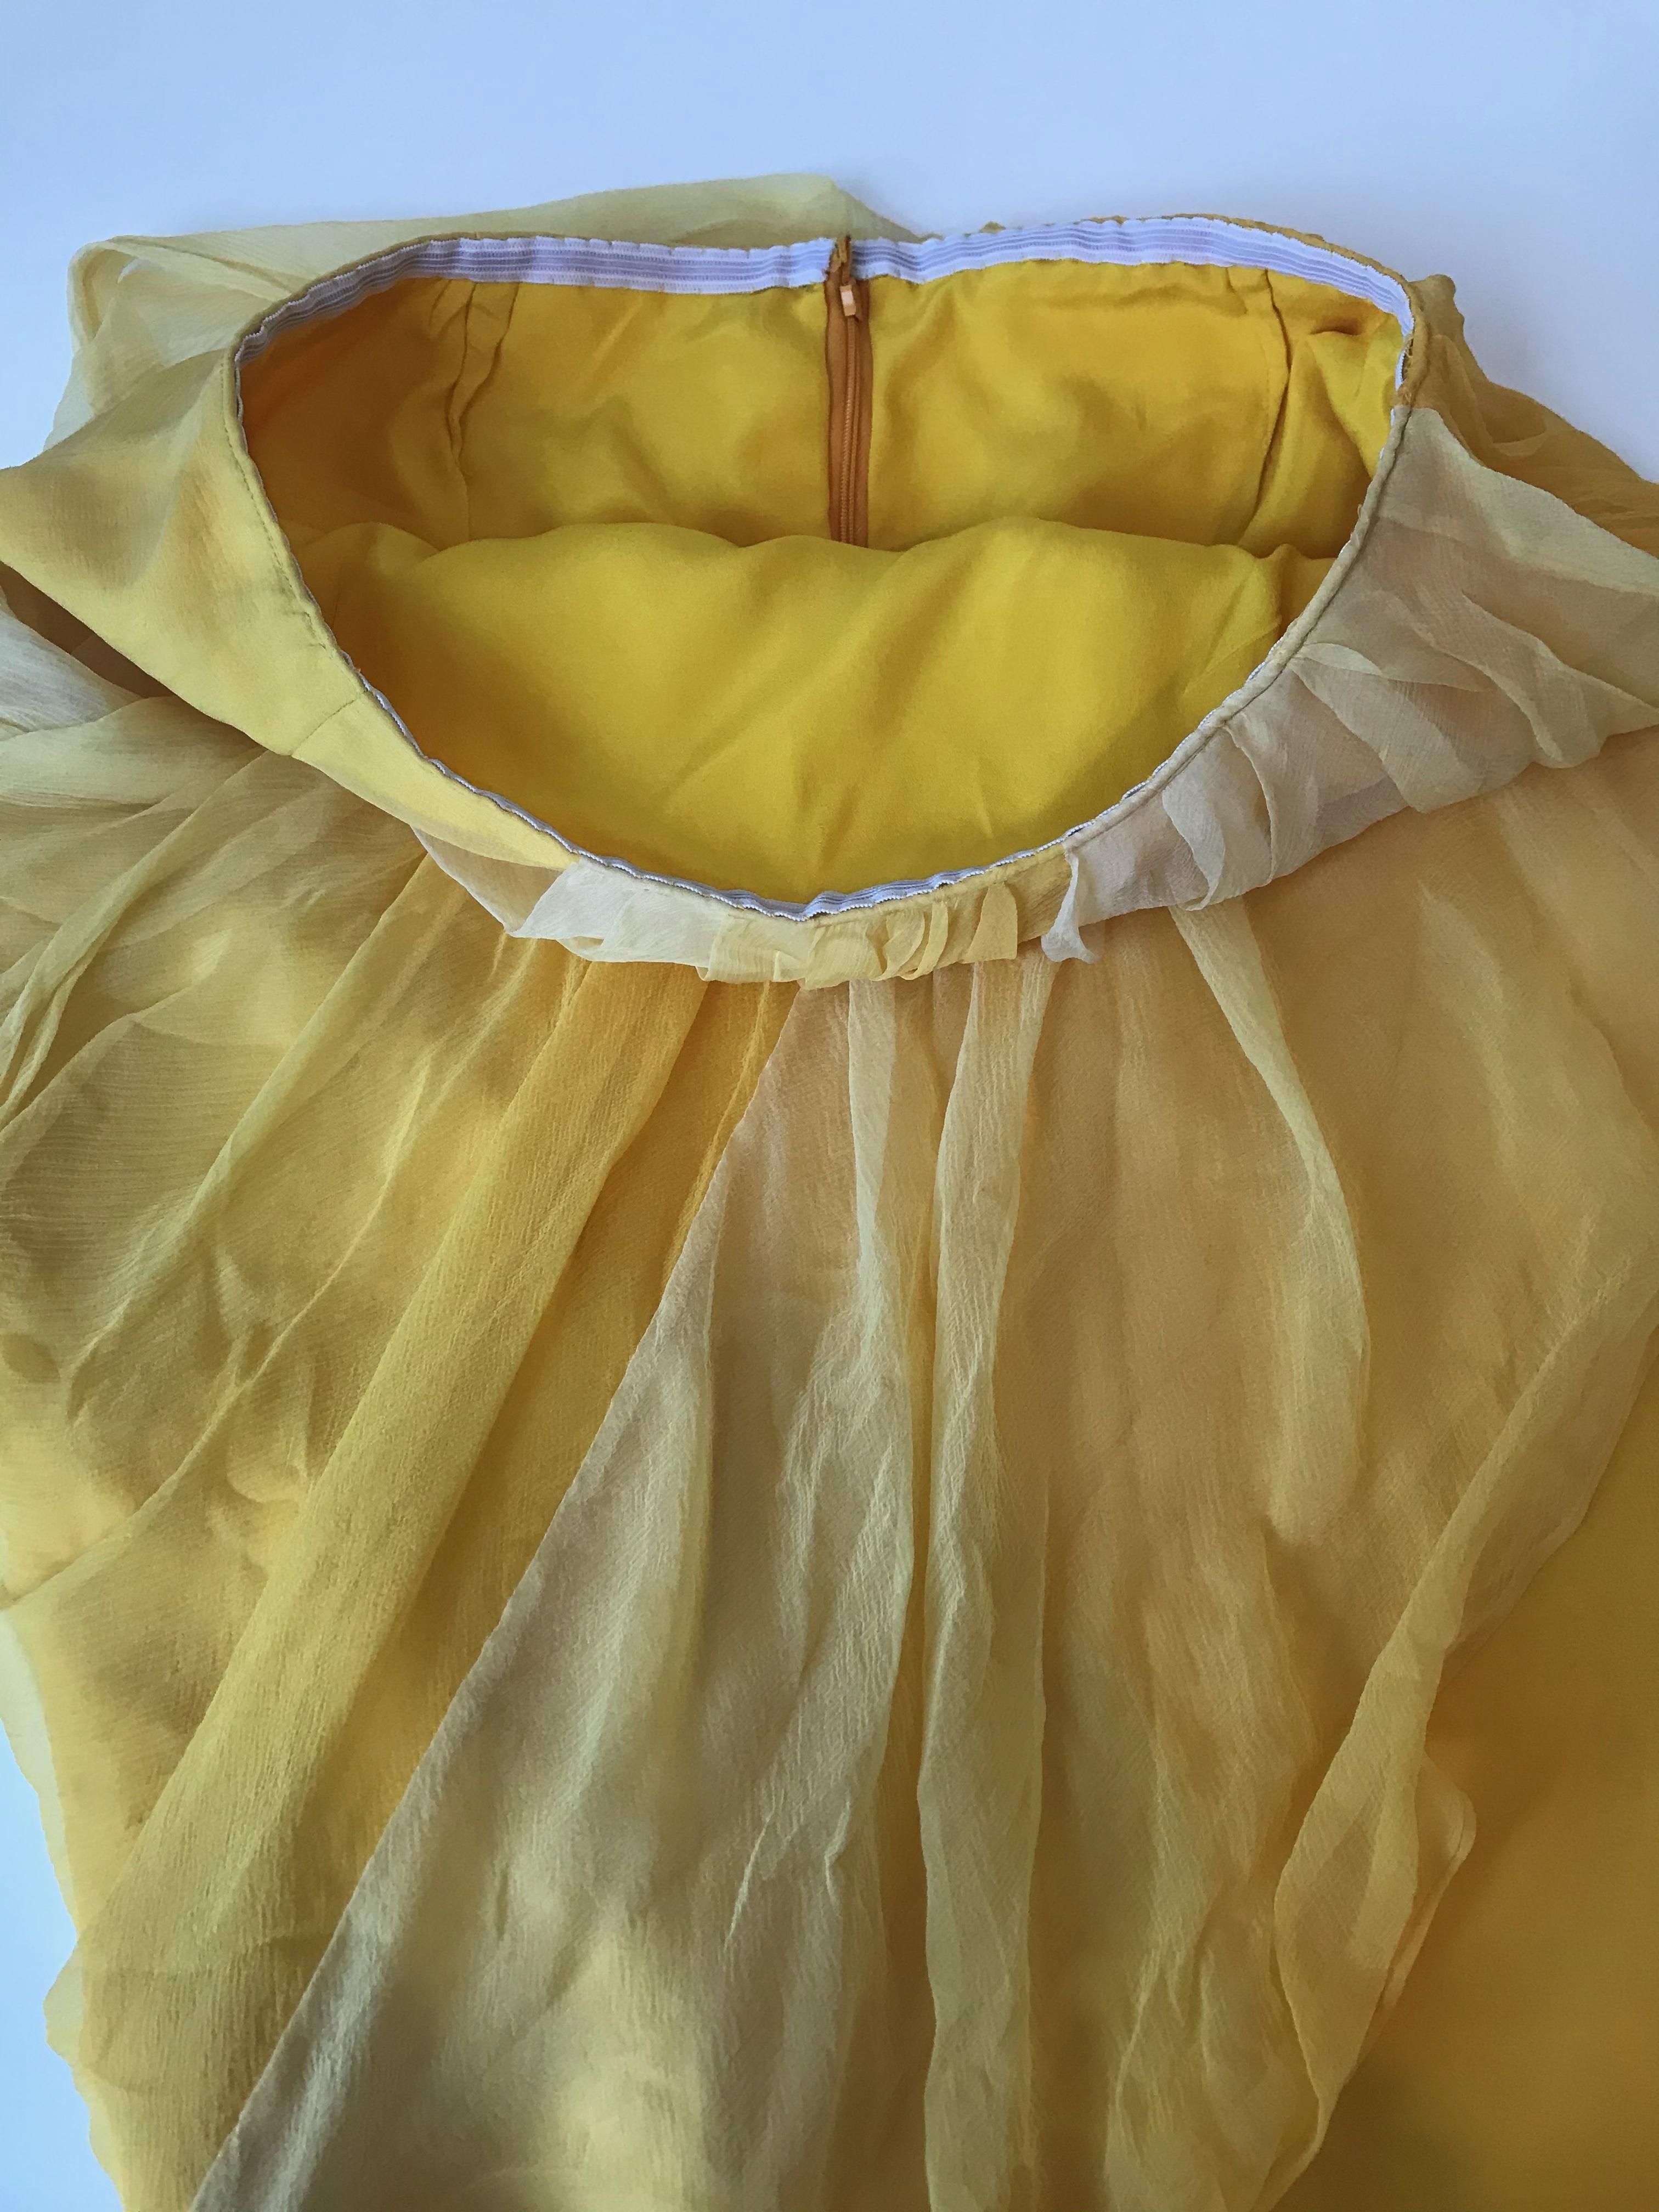 Gianni Versace for Genny Yellow Beaded Jacket and Chiffon Skirt Ensemble For Sale 14